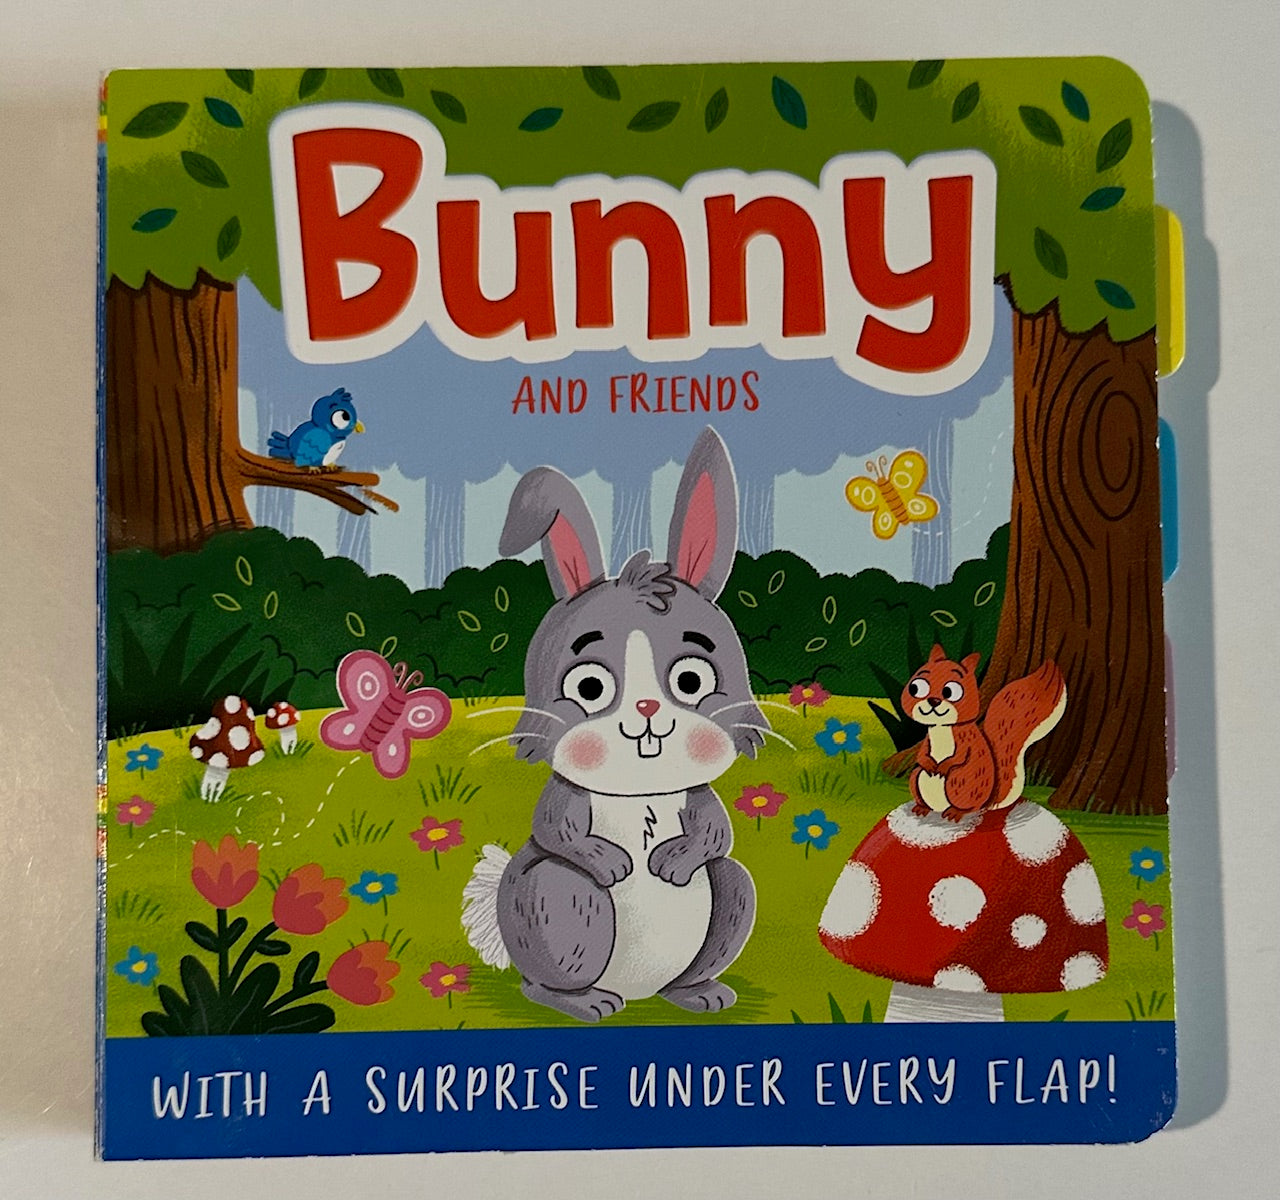 "Bunny and Friends"